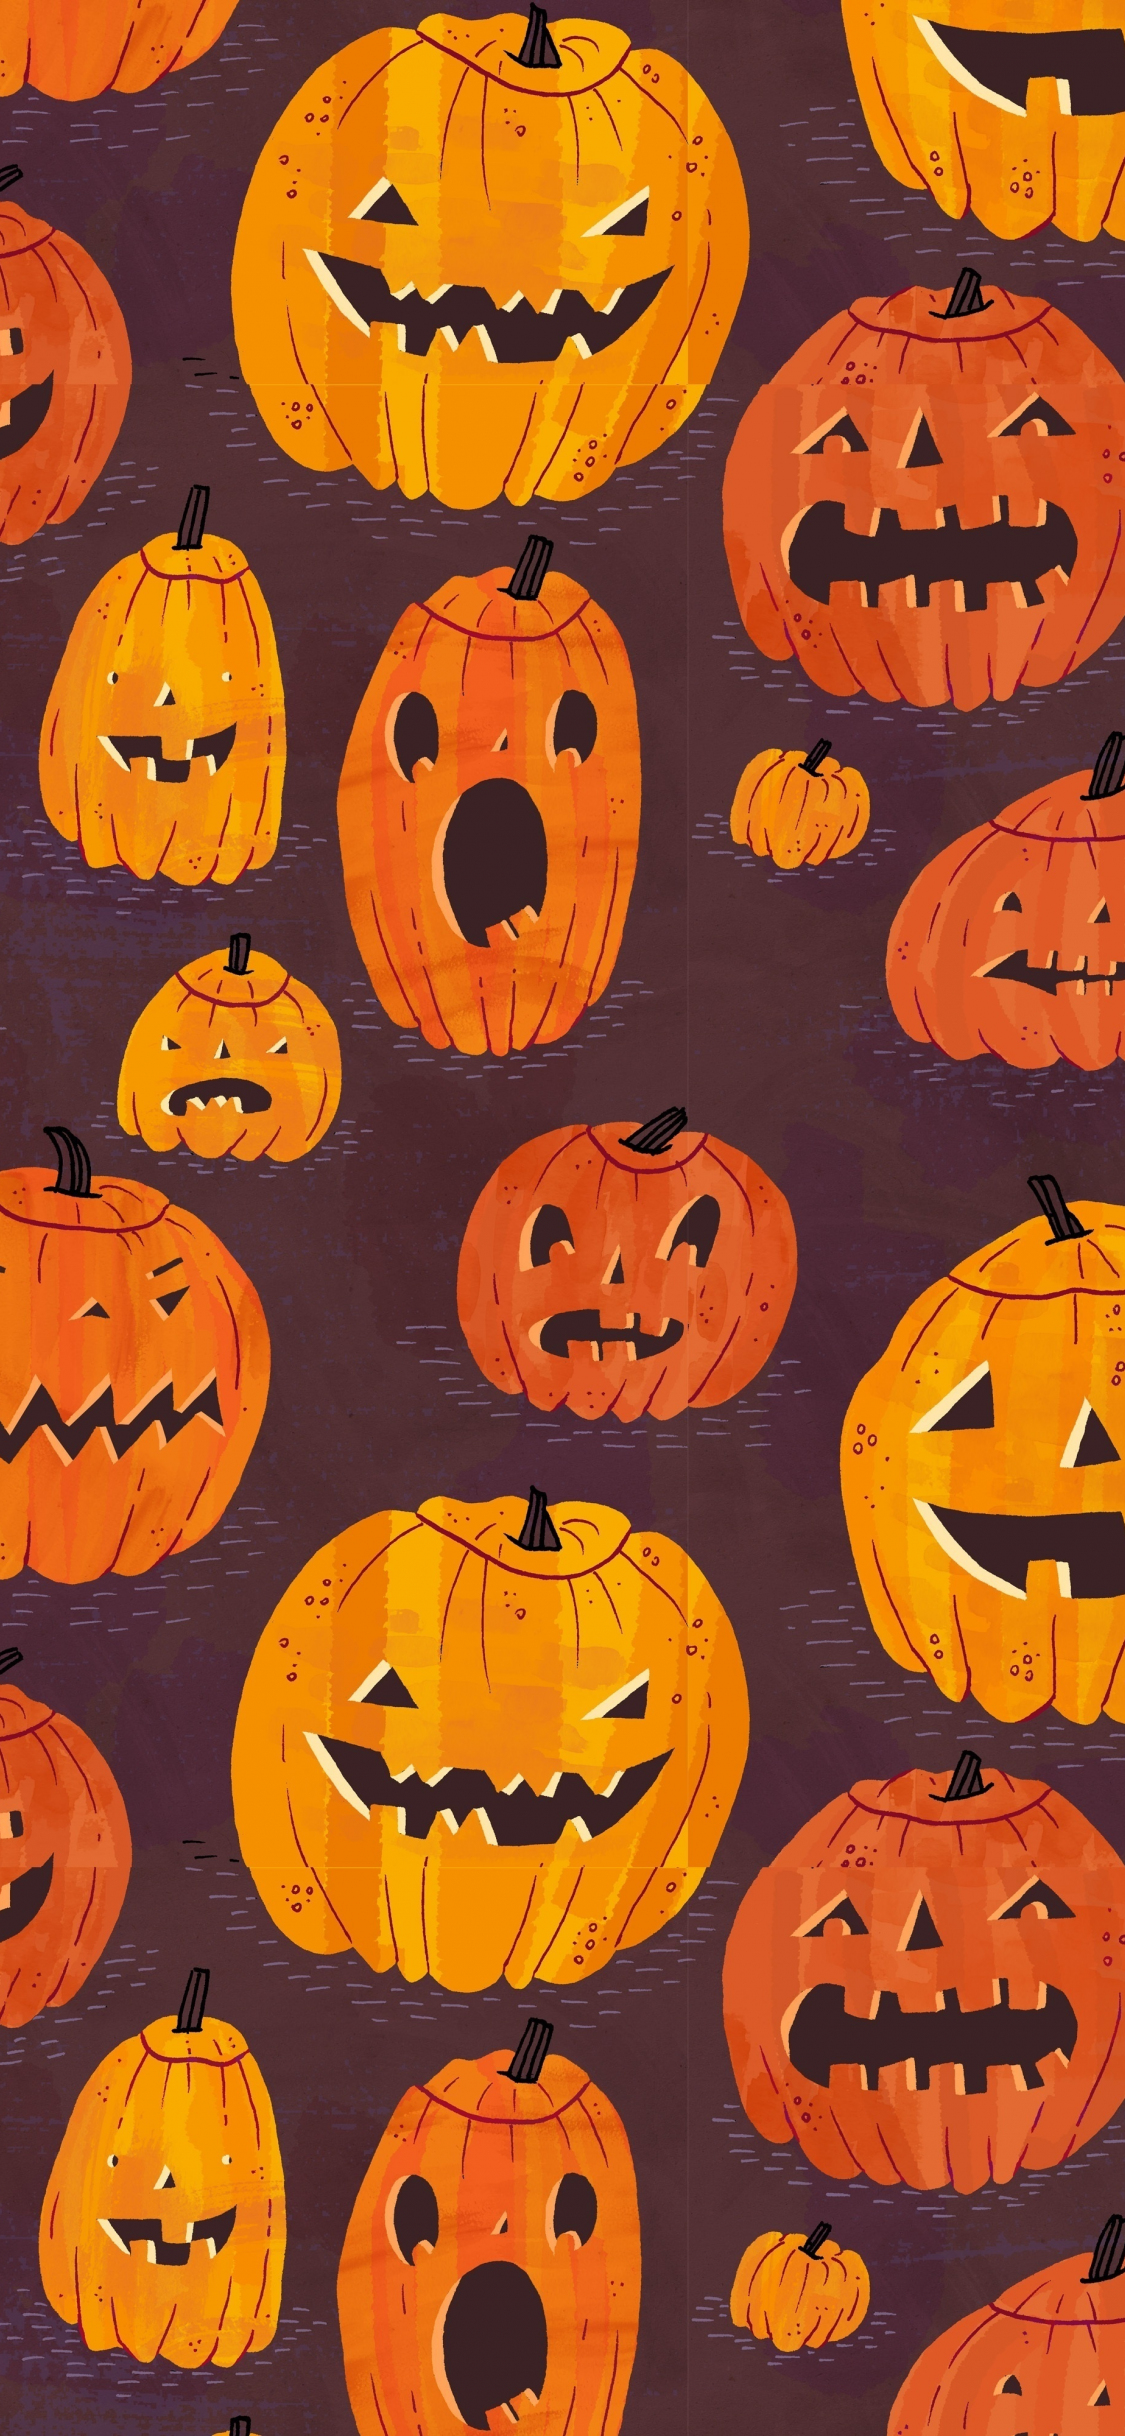 Halloween Pumpkin Ghost Candy Corn iPhone Android Wallpaper Background iPhone 6 6S 7 7s 8 8s X XS MAX XR Samsung Galaxy Note 9 Wallpapers